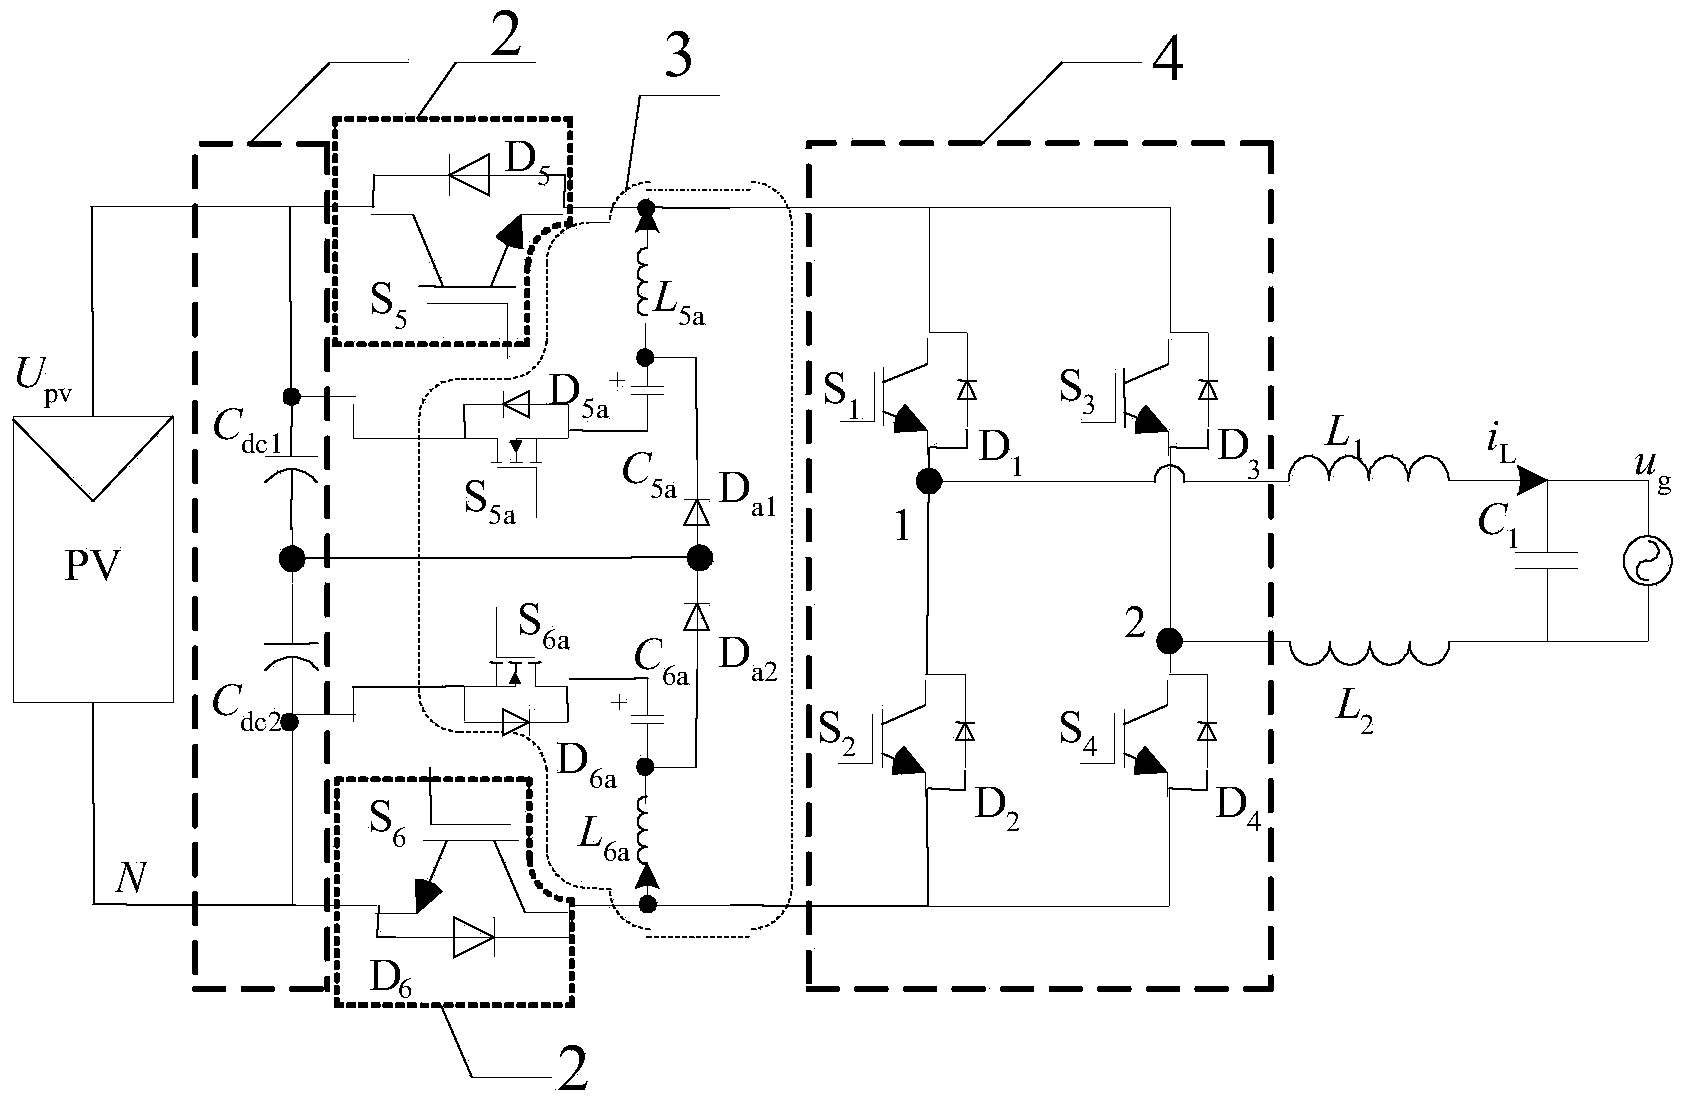 Switching-loss-free full-bridge non-isolated photovoltaic grid-connected inverter and on-off control timing sequence